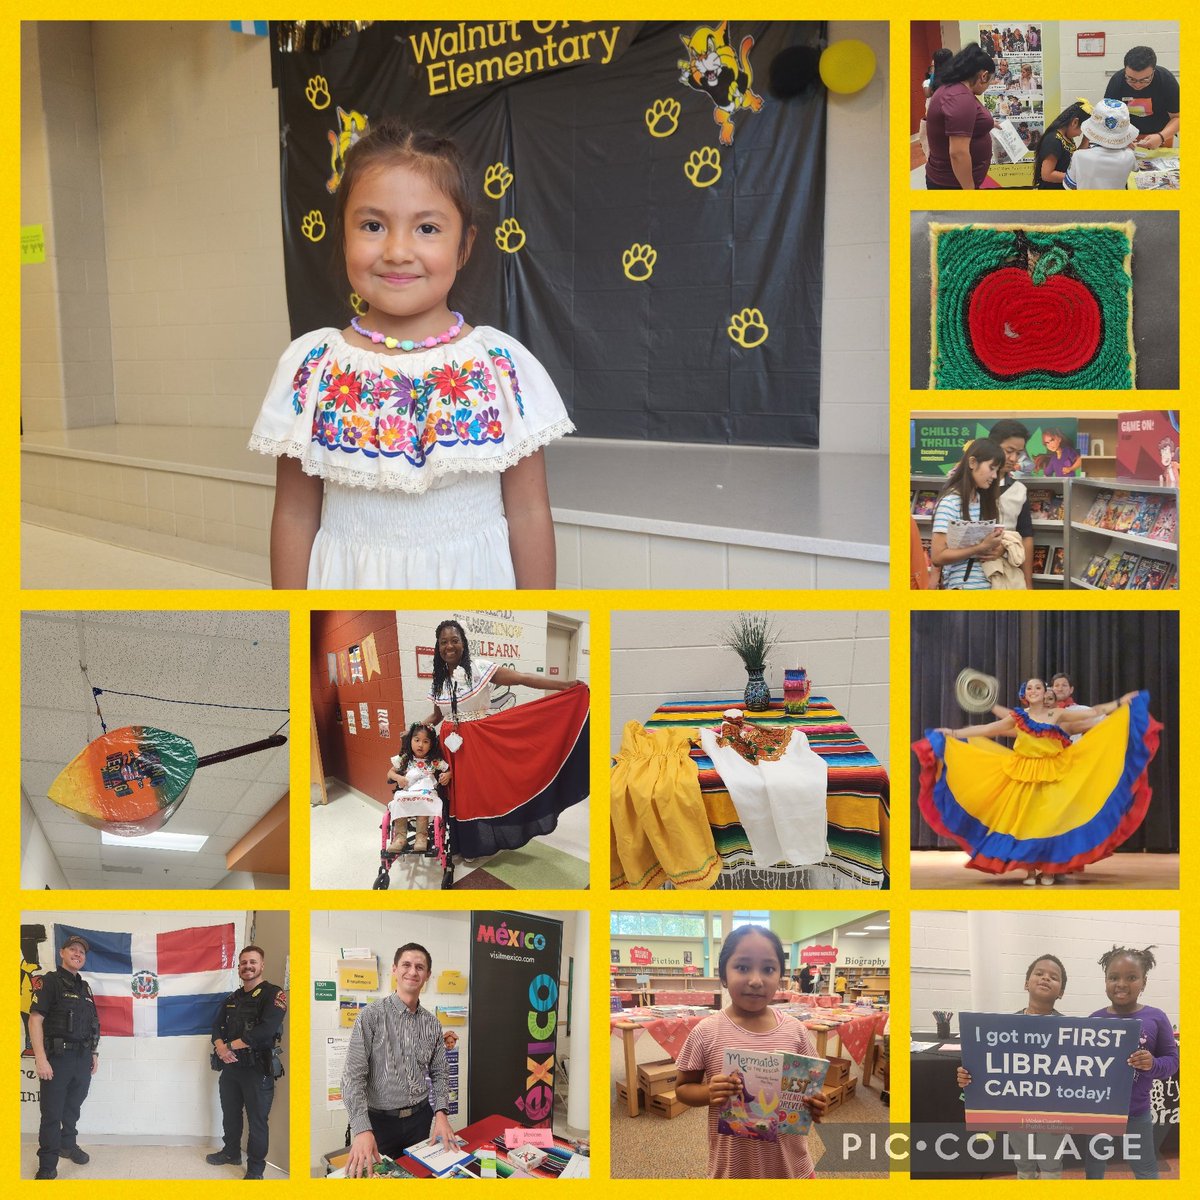 Our Hispanic Heritage Month Celebration was well attended. Families learned about various countries through music and dance, interacted with community partners, enjoyed the art gallery, and shopped at the Scholastic Book Fair. #TheCreekIsRising #BiggerandBetter